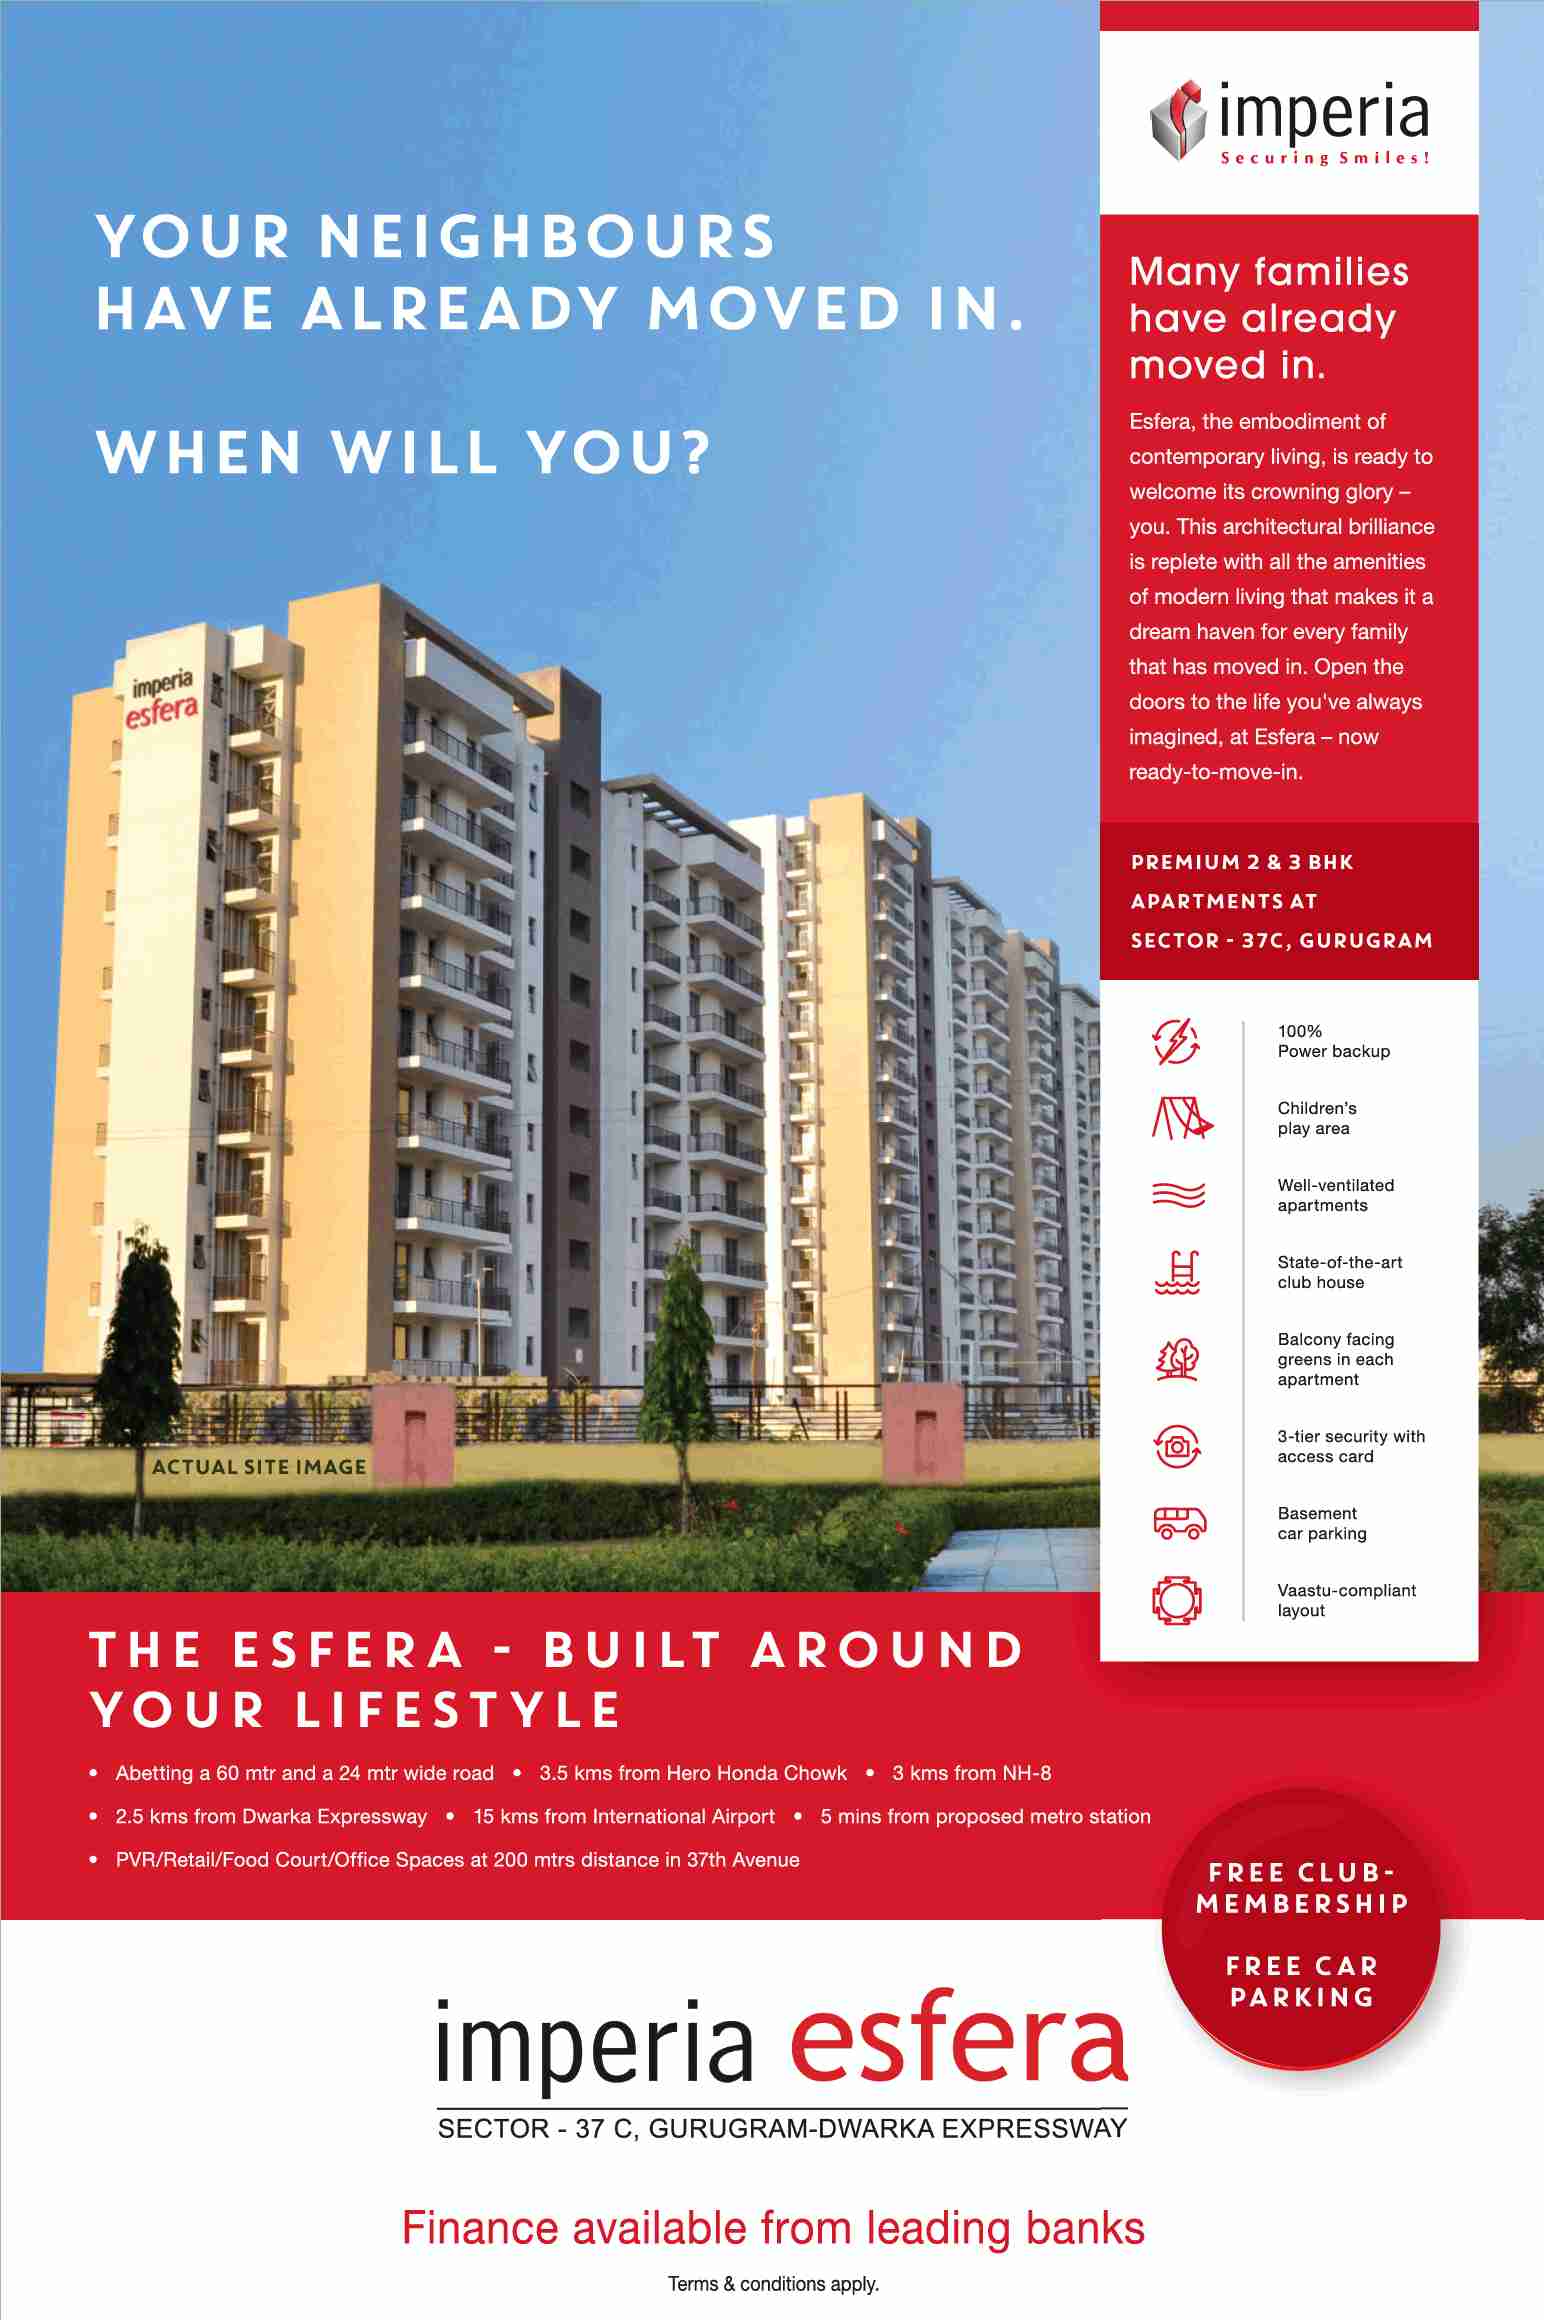 Get free club membership & car parking by booking home at Imperia The Esfera in Gurgaon